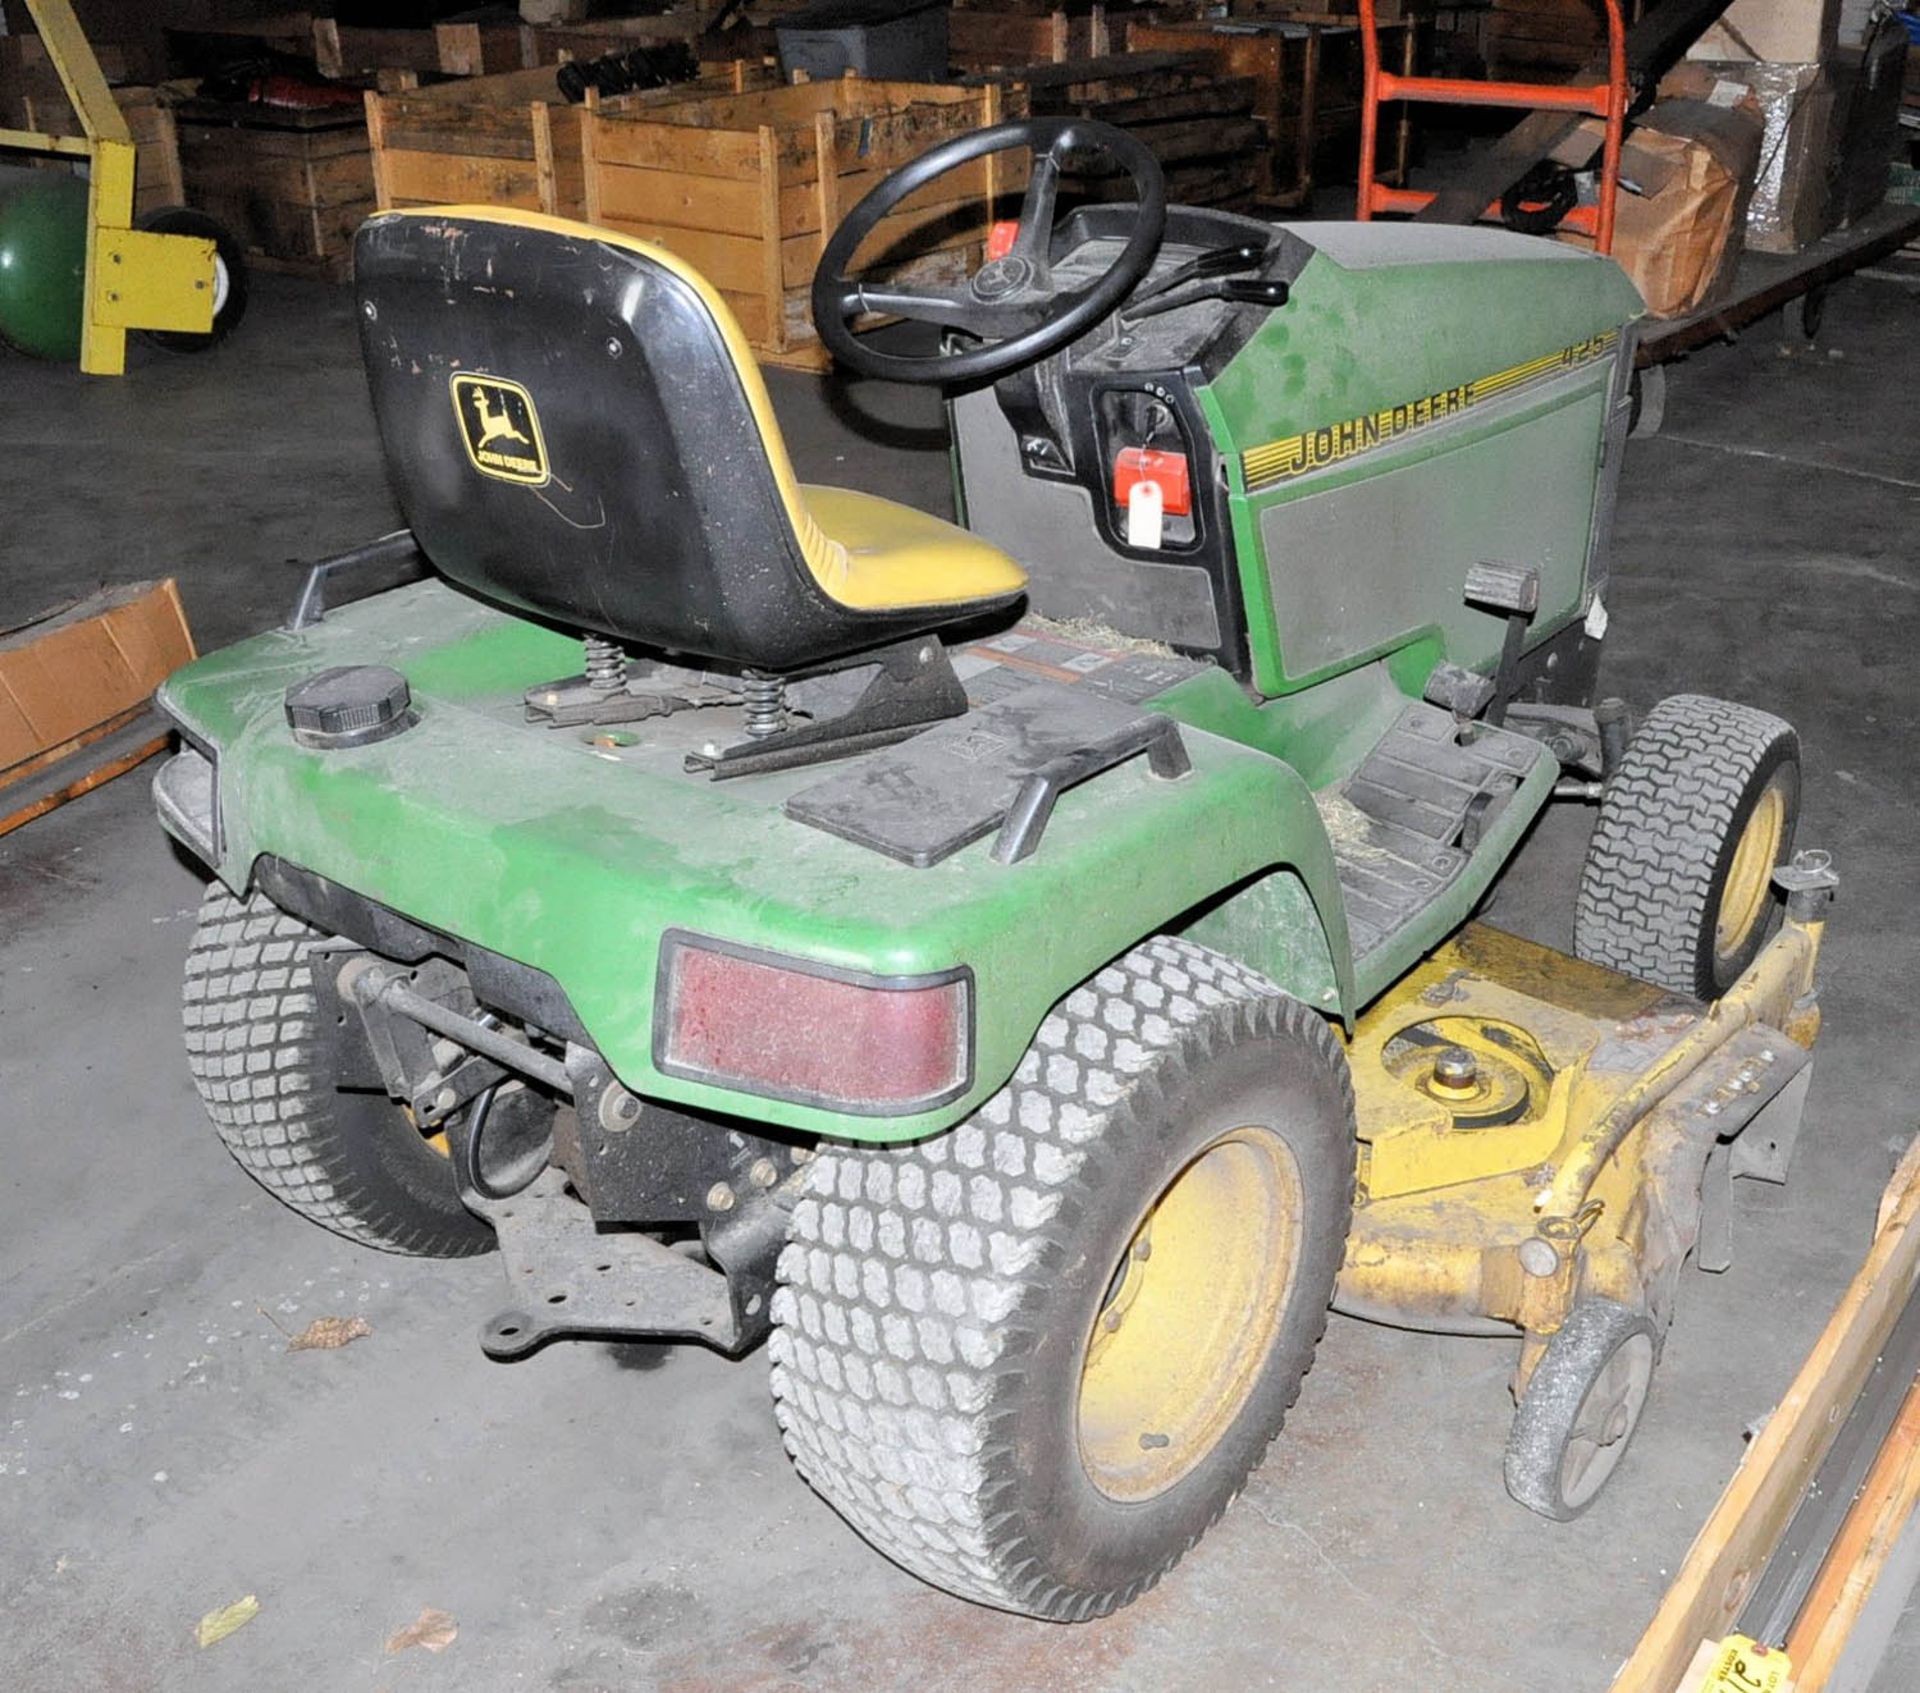 JOHN DEERE 425, GAS POWERED LAWN TRACTOR WITH 60" MOWING DECK, (OUTBUILDING-TIFFIN) - Image 2 of 2